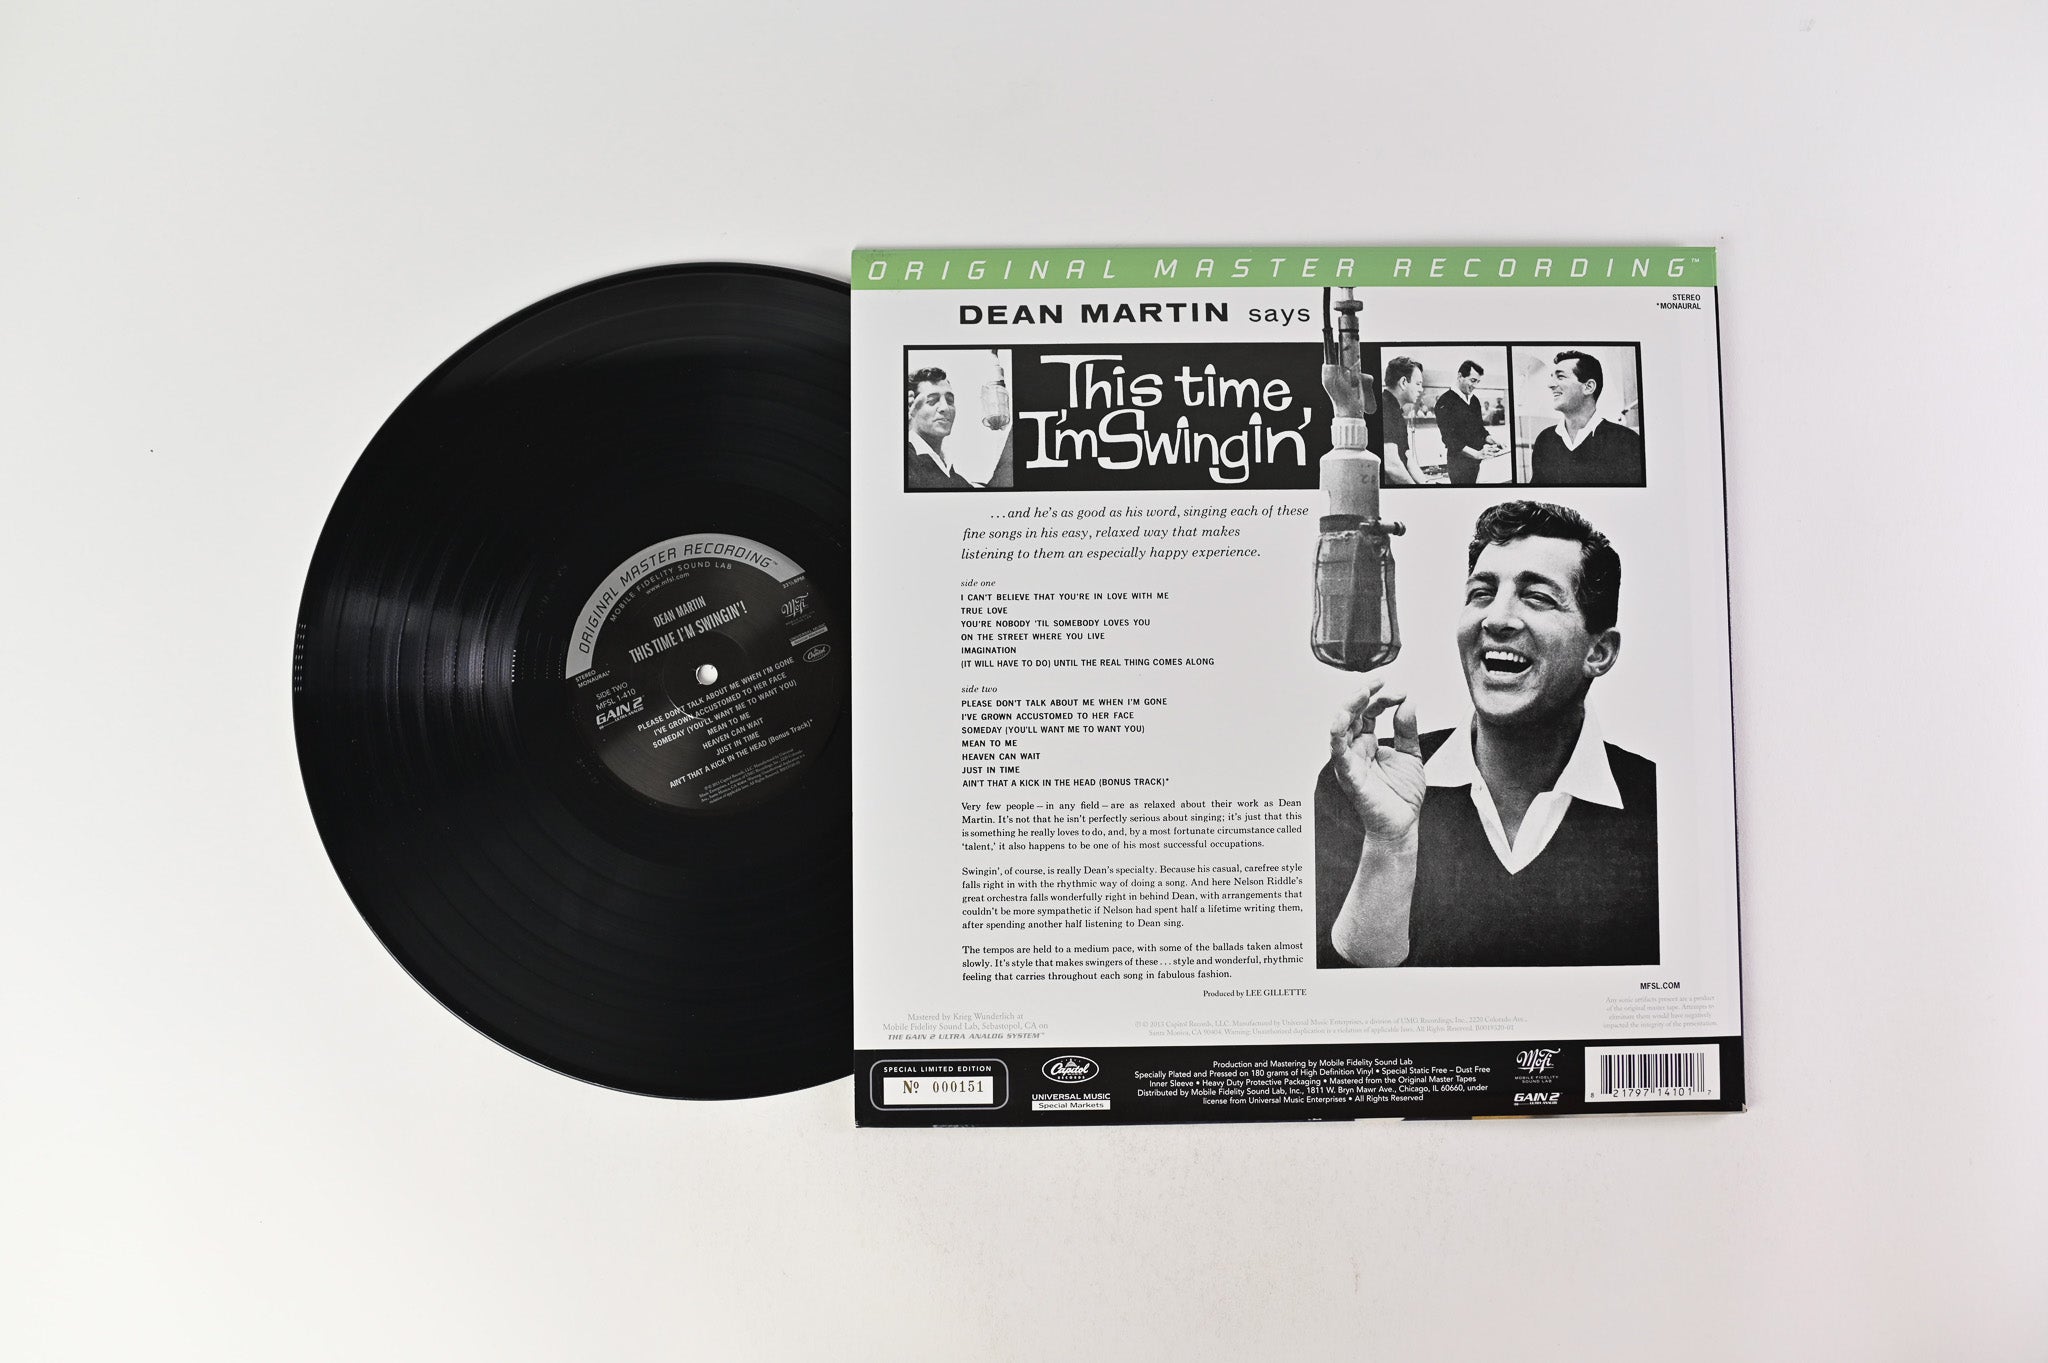 Dean Martin - This Time I'm Swingin' on Mobile Fidelity Sound Lab